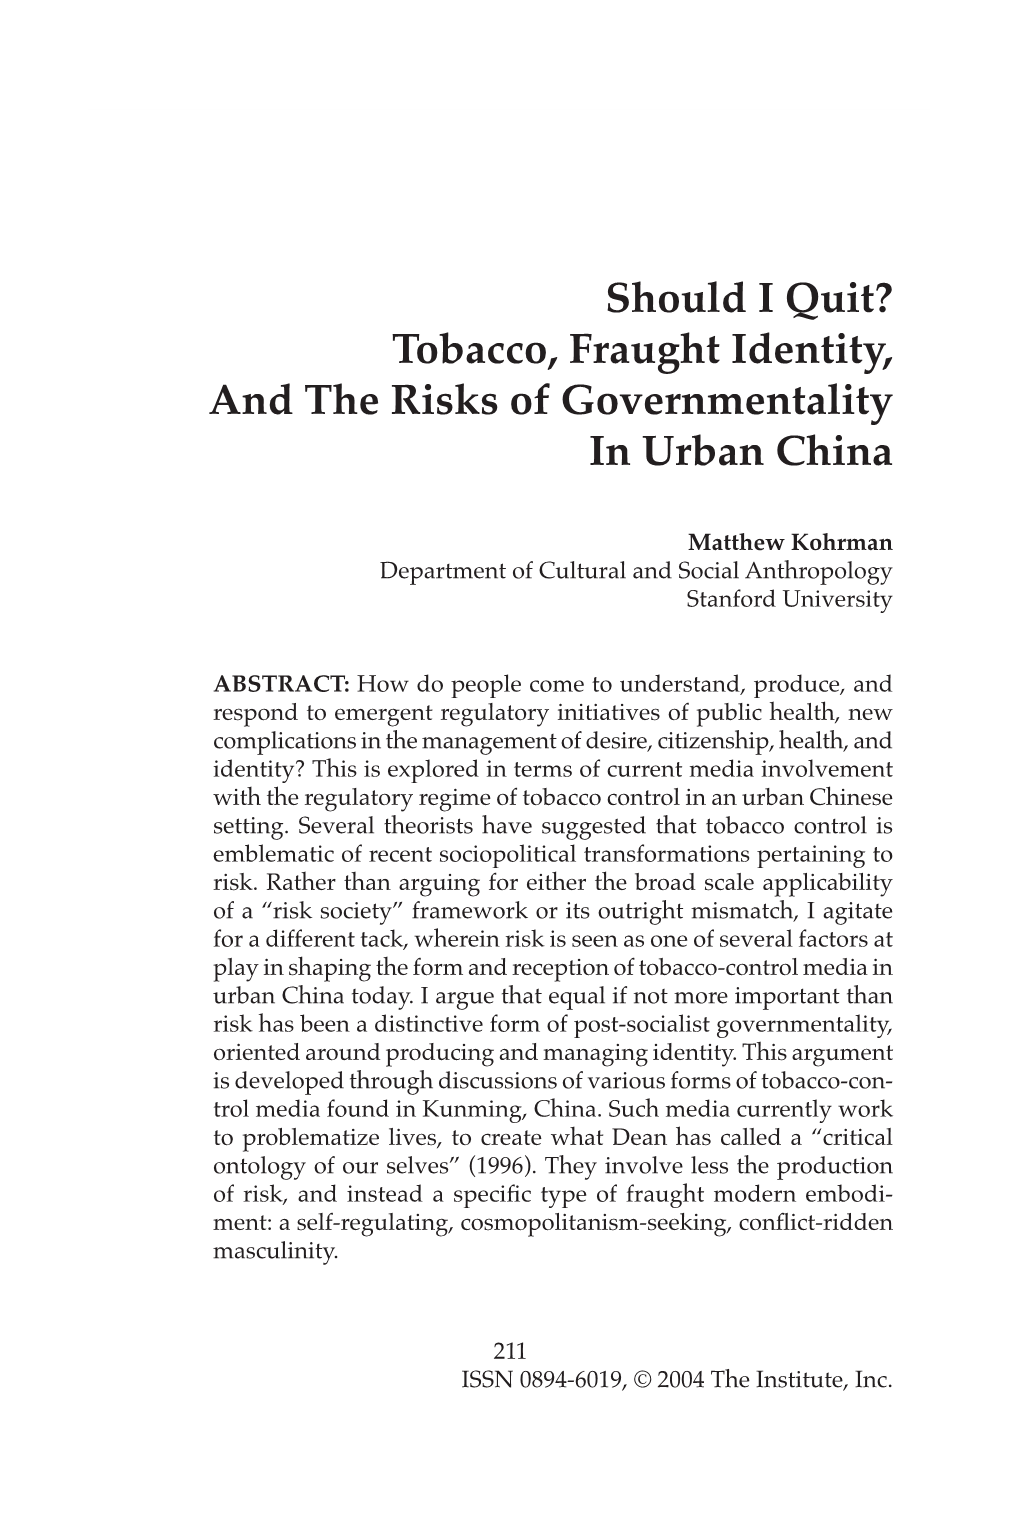 Tobacco, Fraught Identity, and the Risks of Governmentality in Urban China